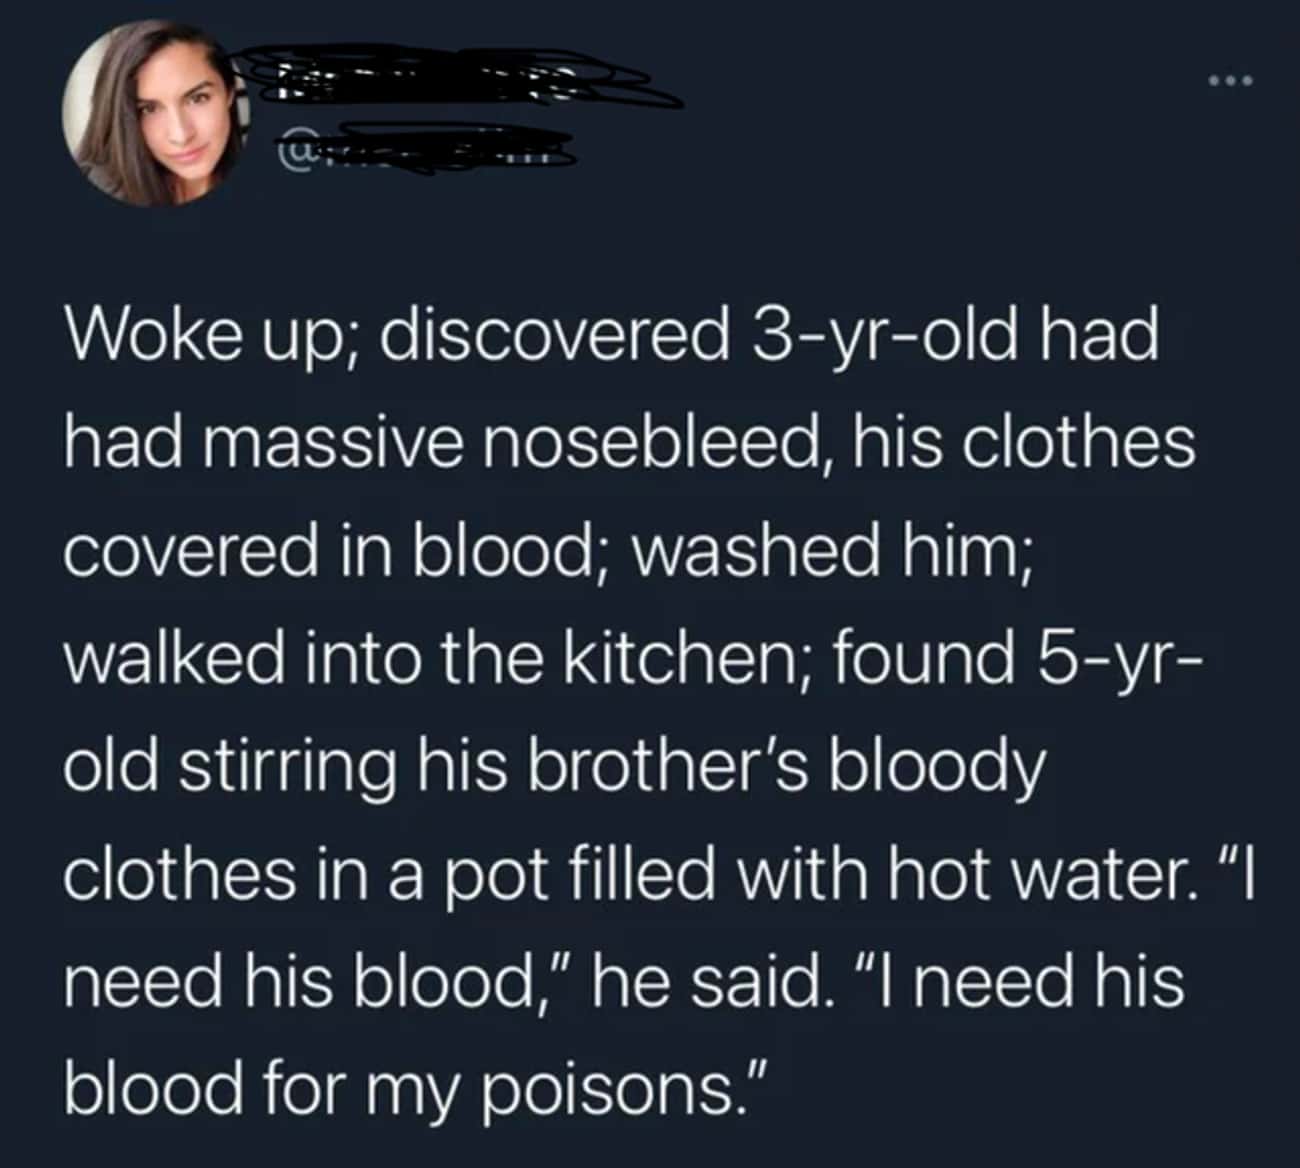 'Need His Blood'